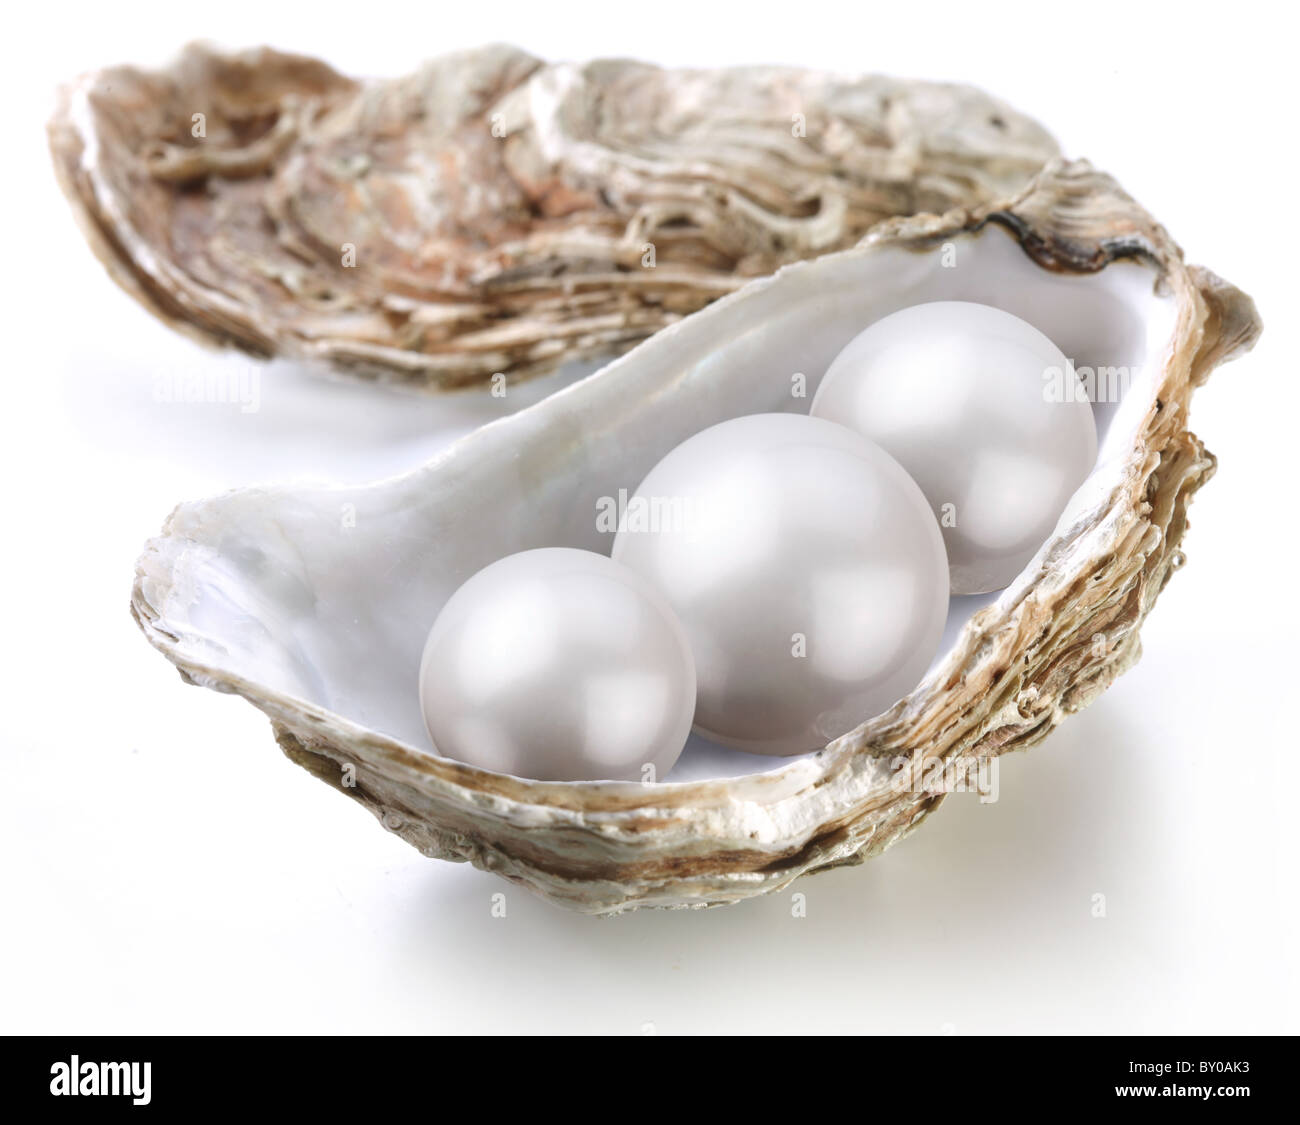 Image placer pearls in a shell on a white background. Stock Photo